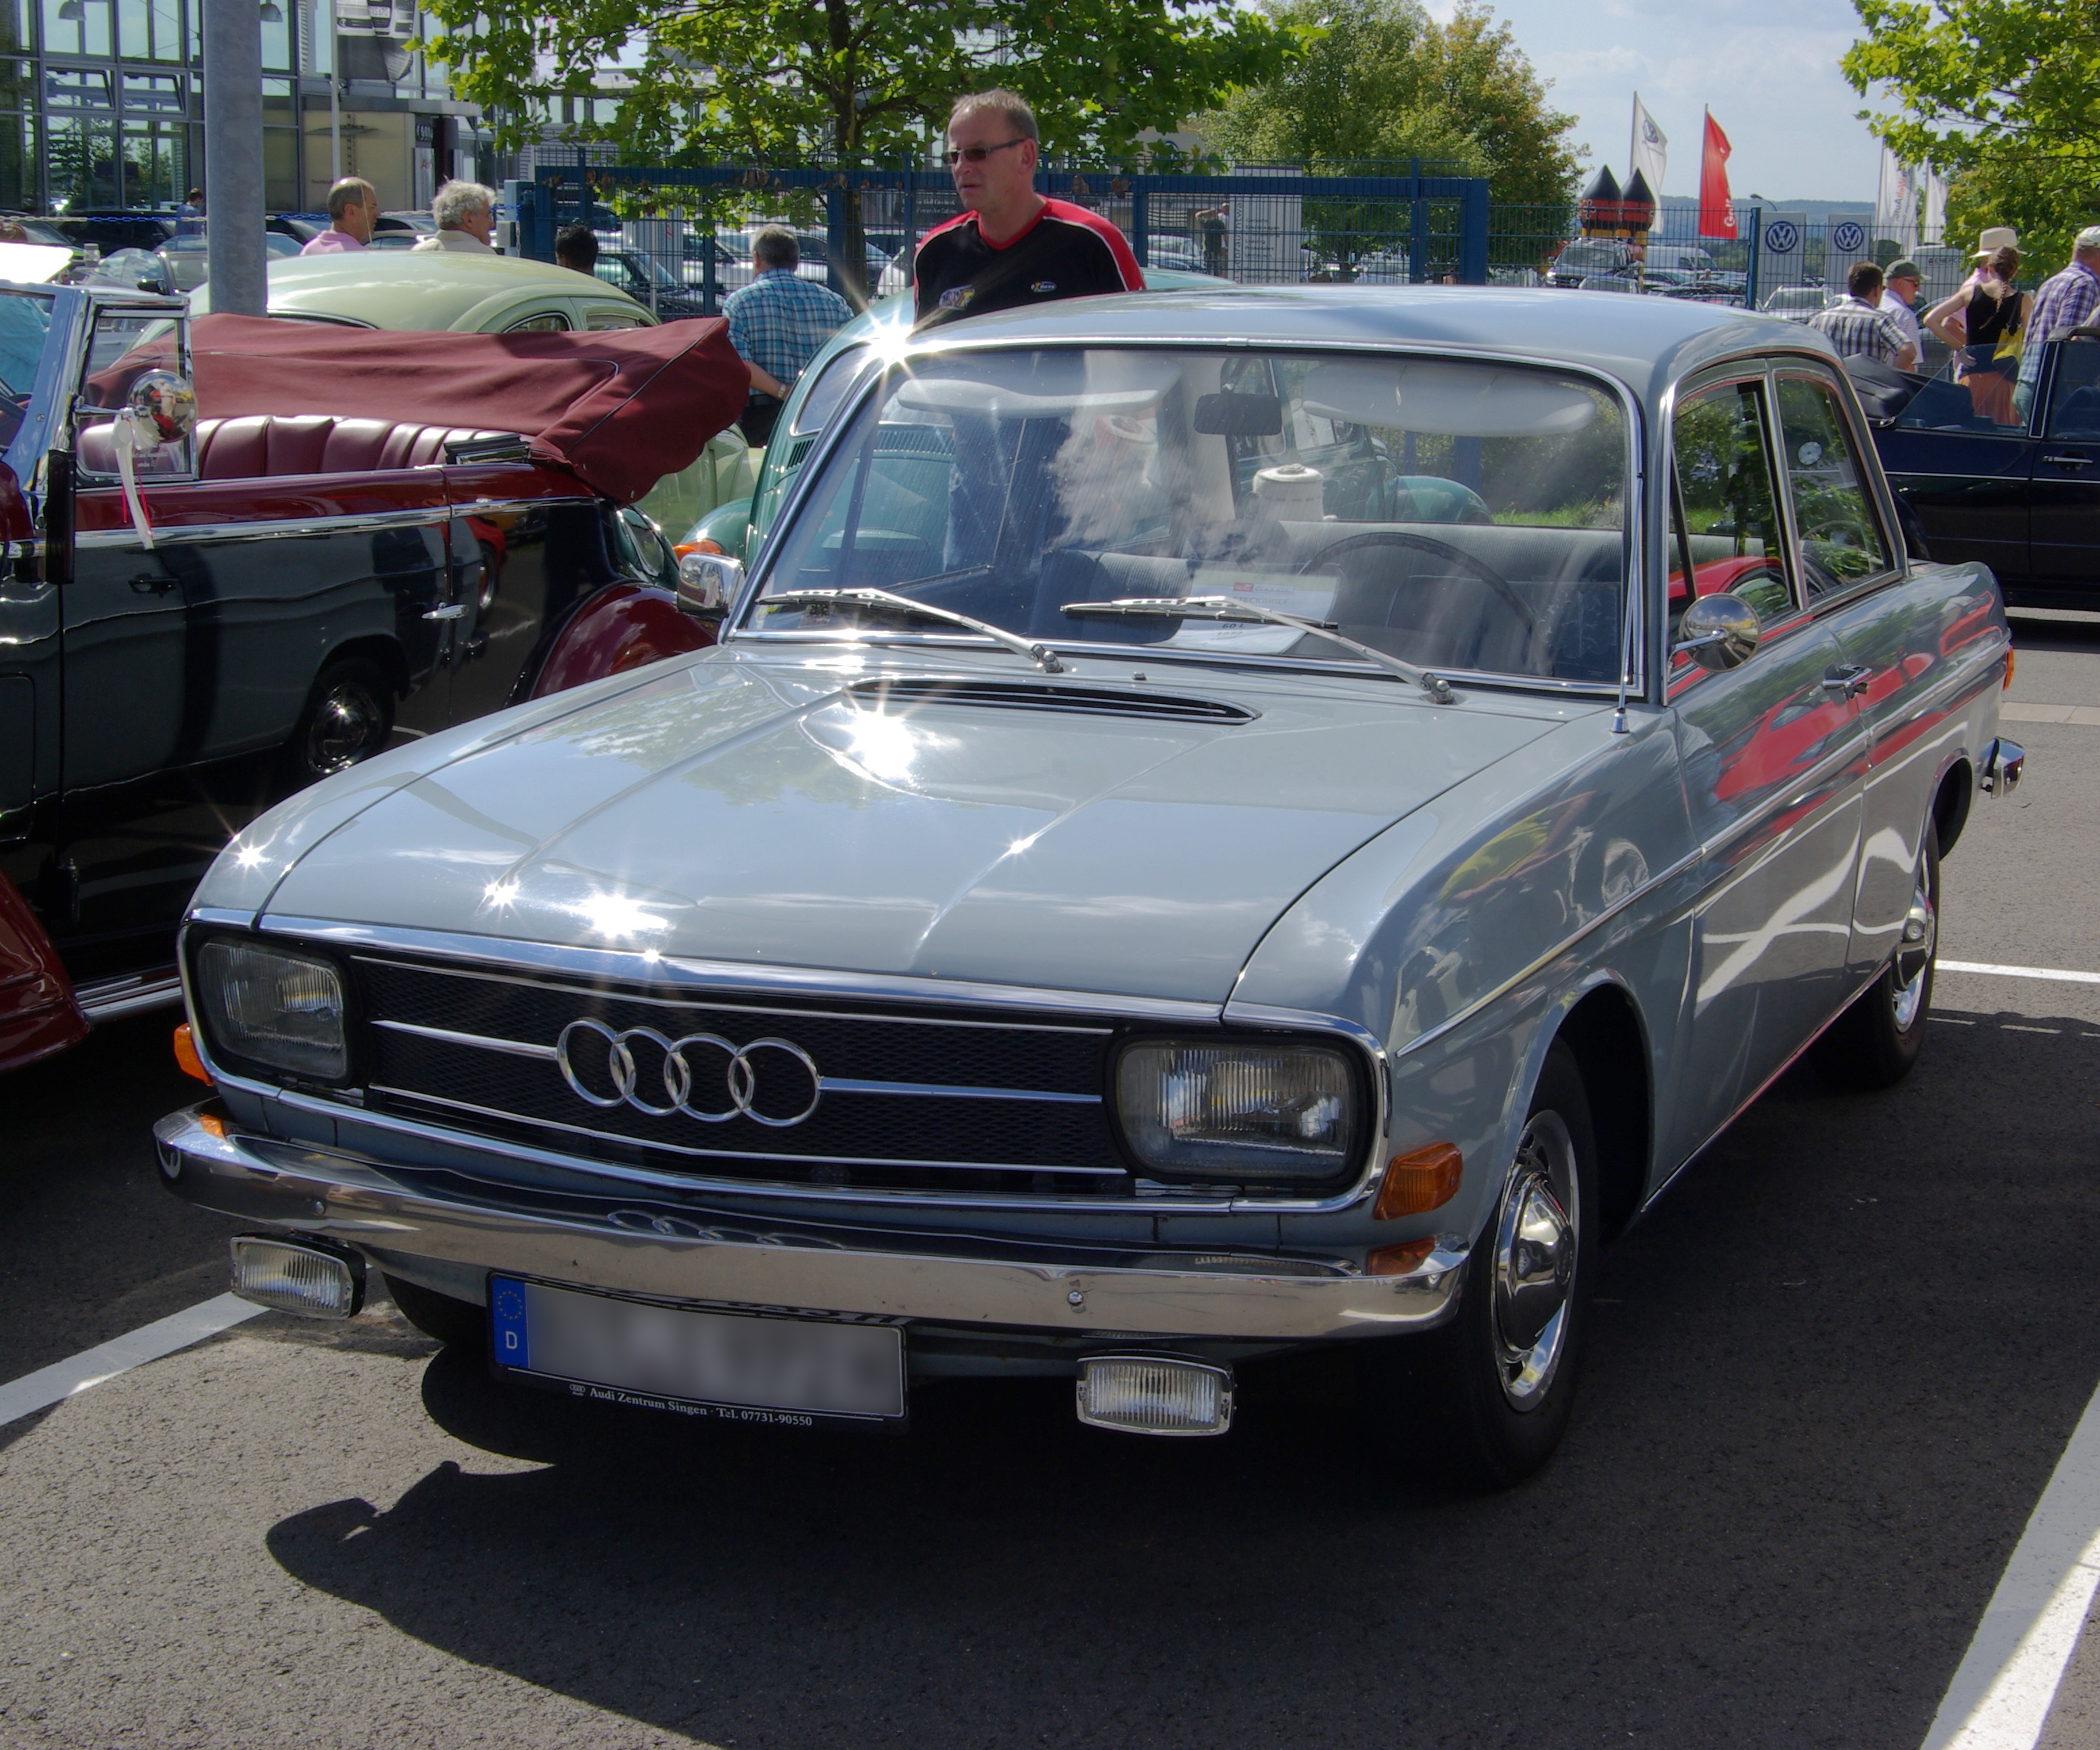 1972 Audi 60 related infomation,specifications - WeiLi Automotive Network